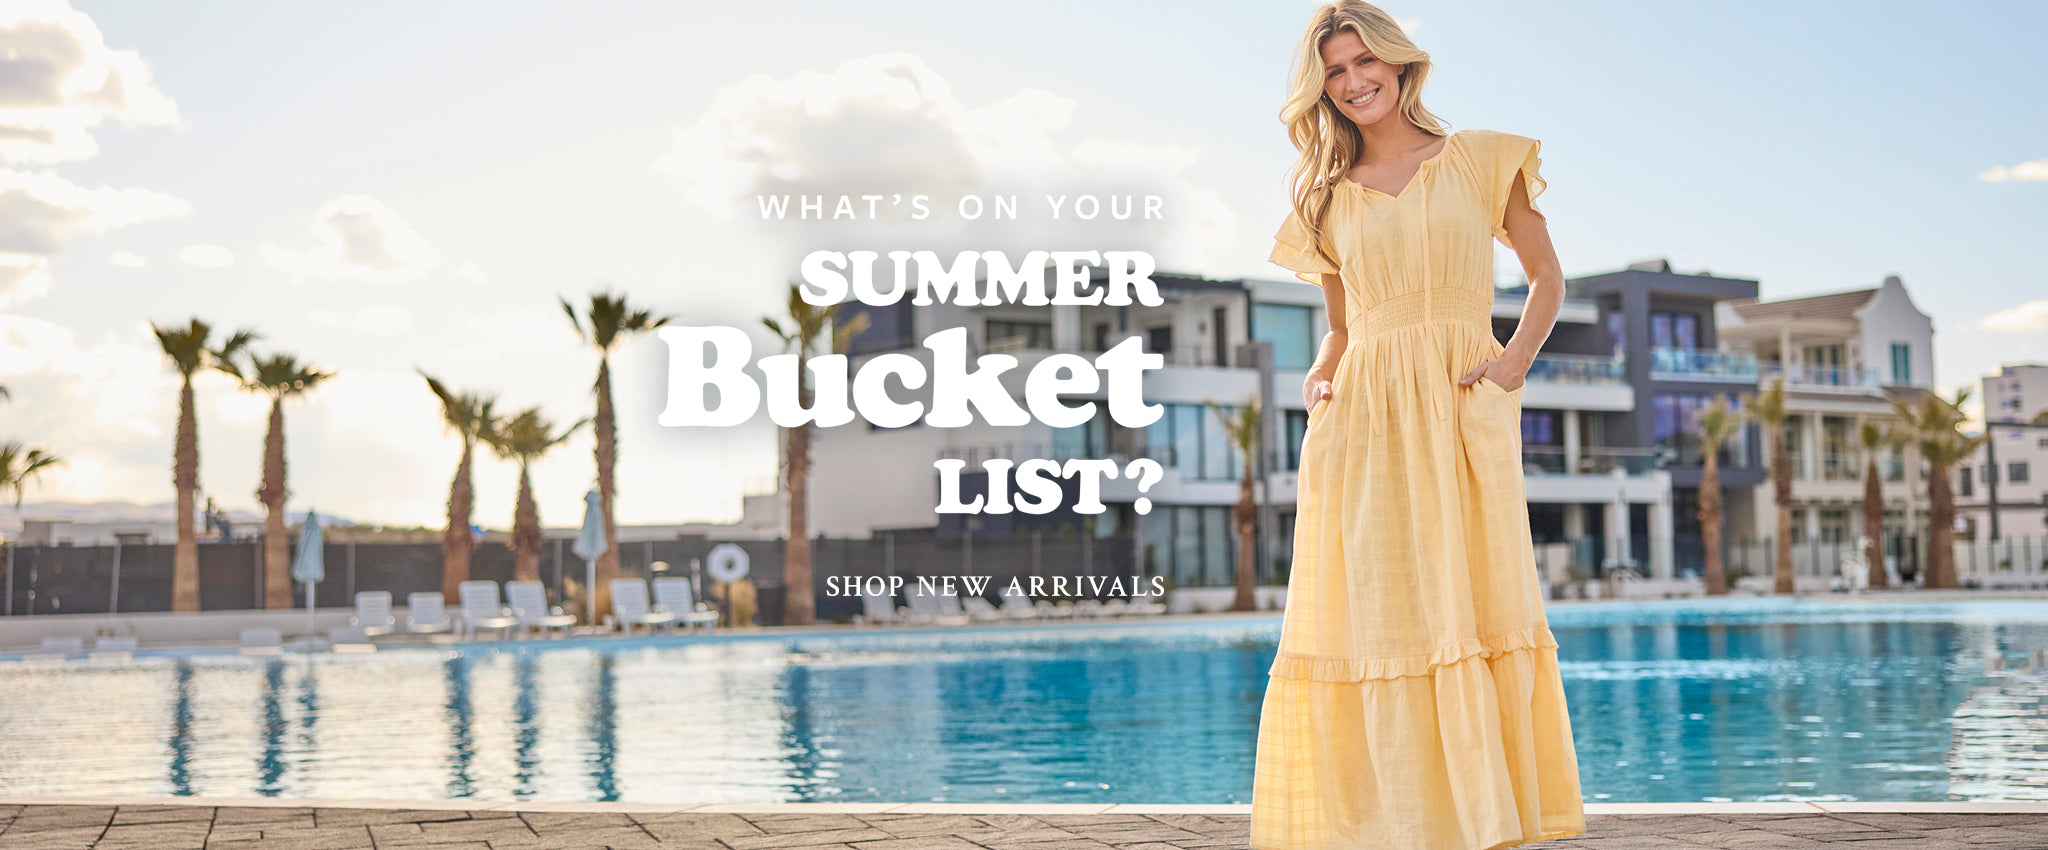 Woman in a yellow short sleeve, maxi dress by a pool with text that reads "What's on your summer bucket list?"